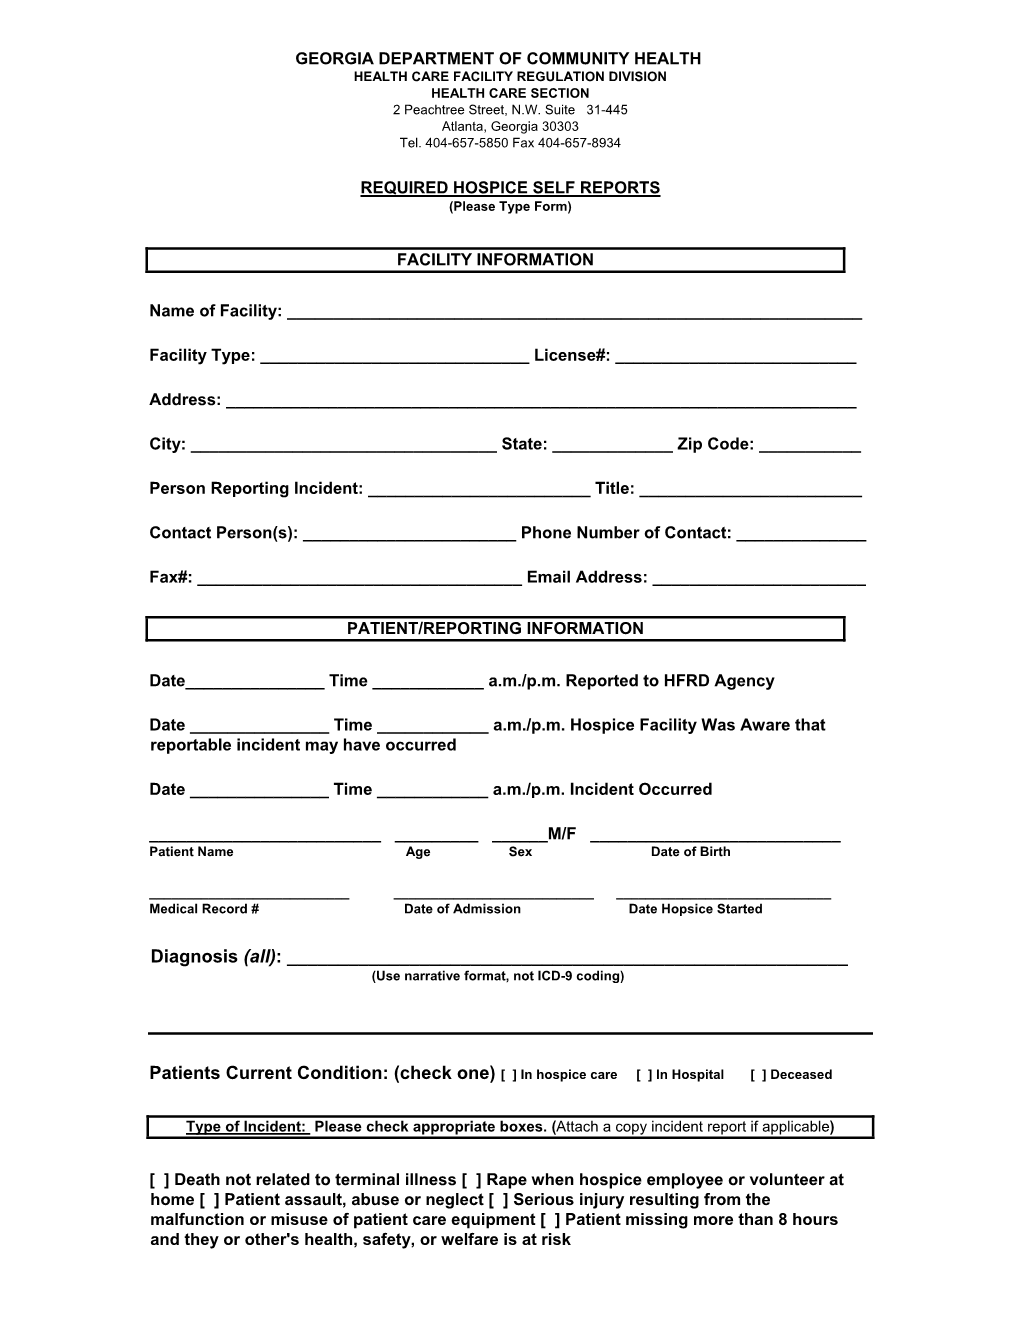 Hospice Self Report Form